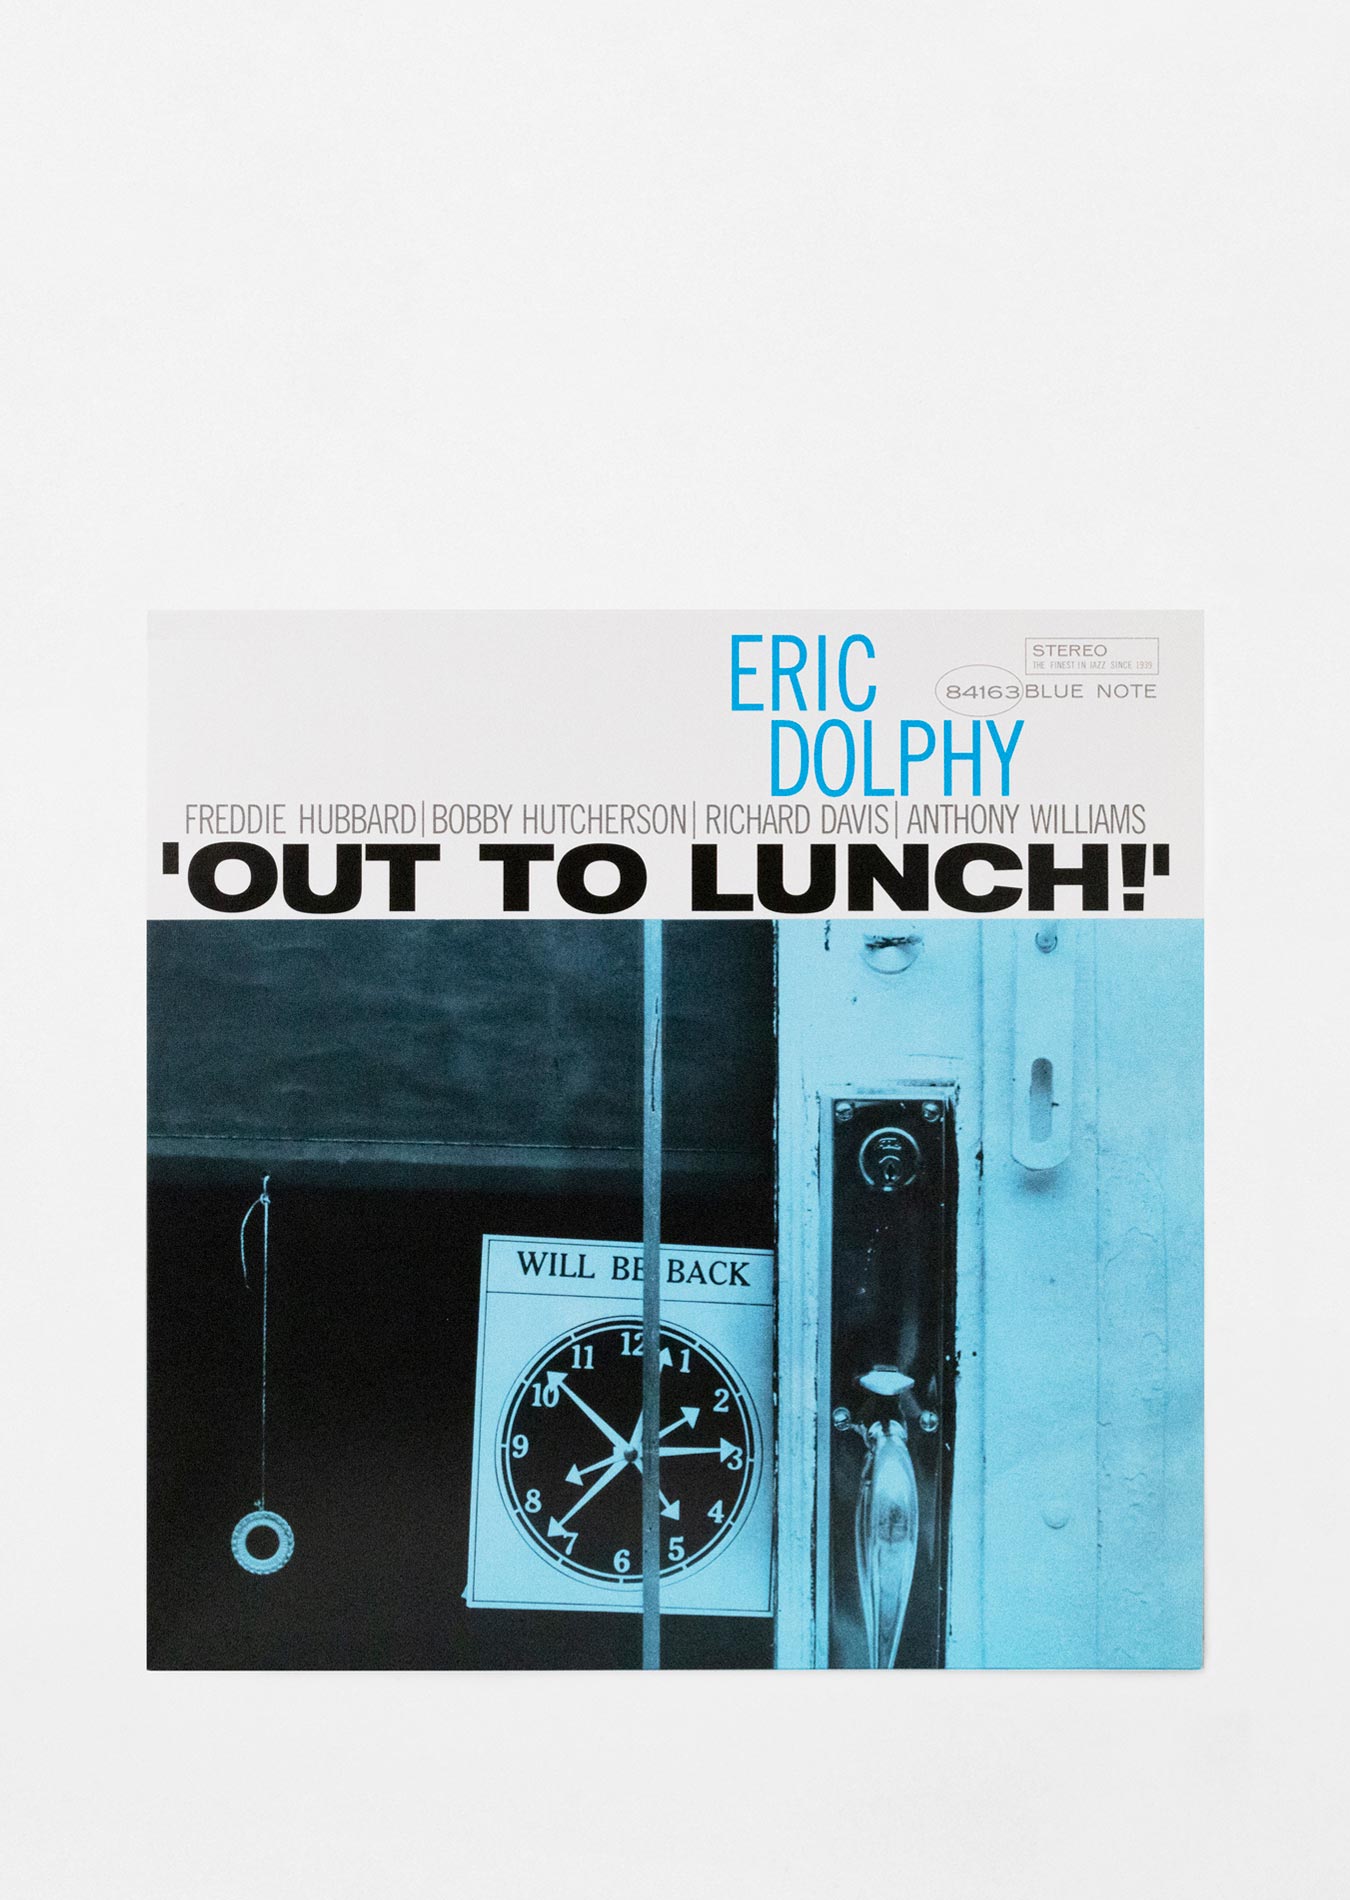 Traadd - Eric Dolphy | Out to Lunch | [ USED ] LP – directorscode.com